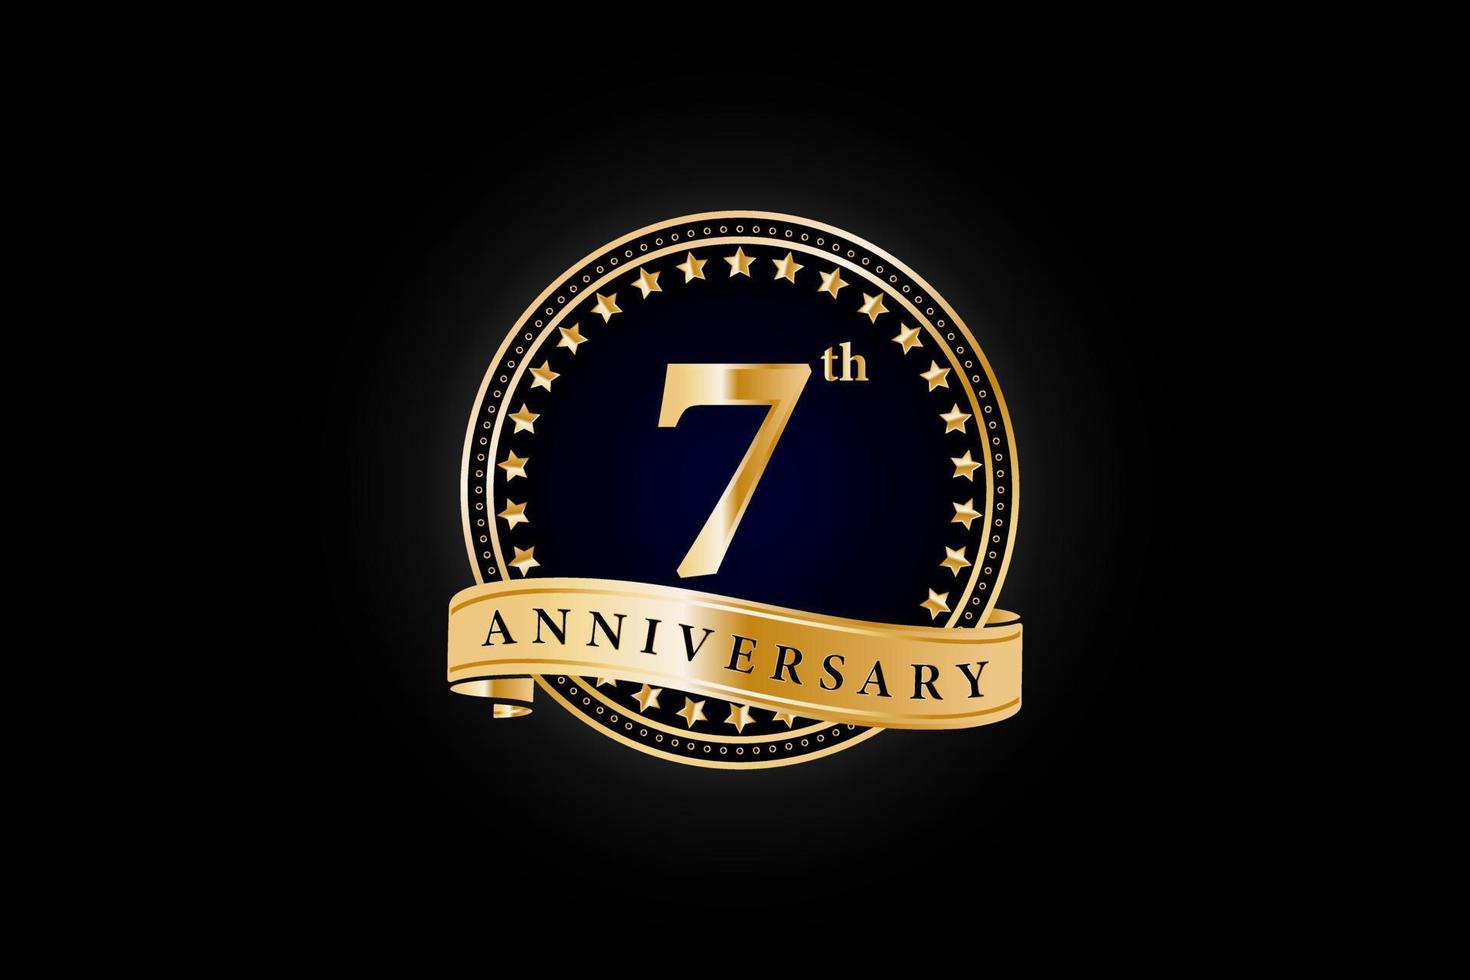 7th anniversary golden gold logo with gold ring and ribbon isolated on black background, vector design for celebration.